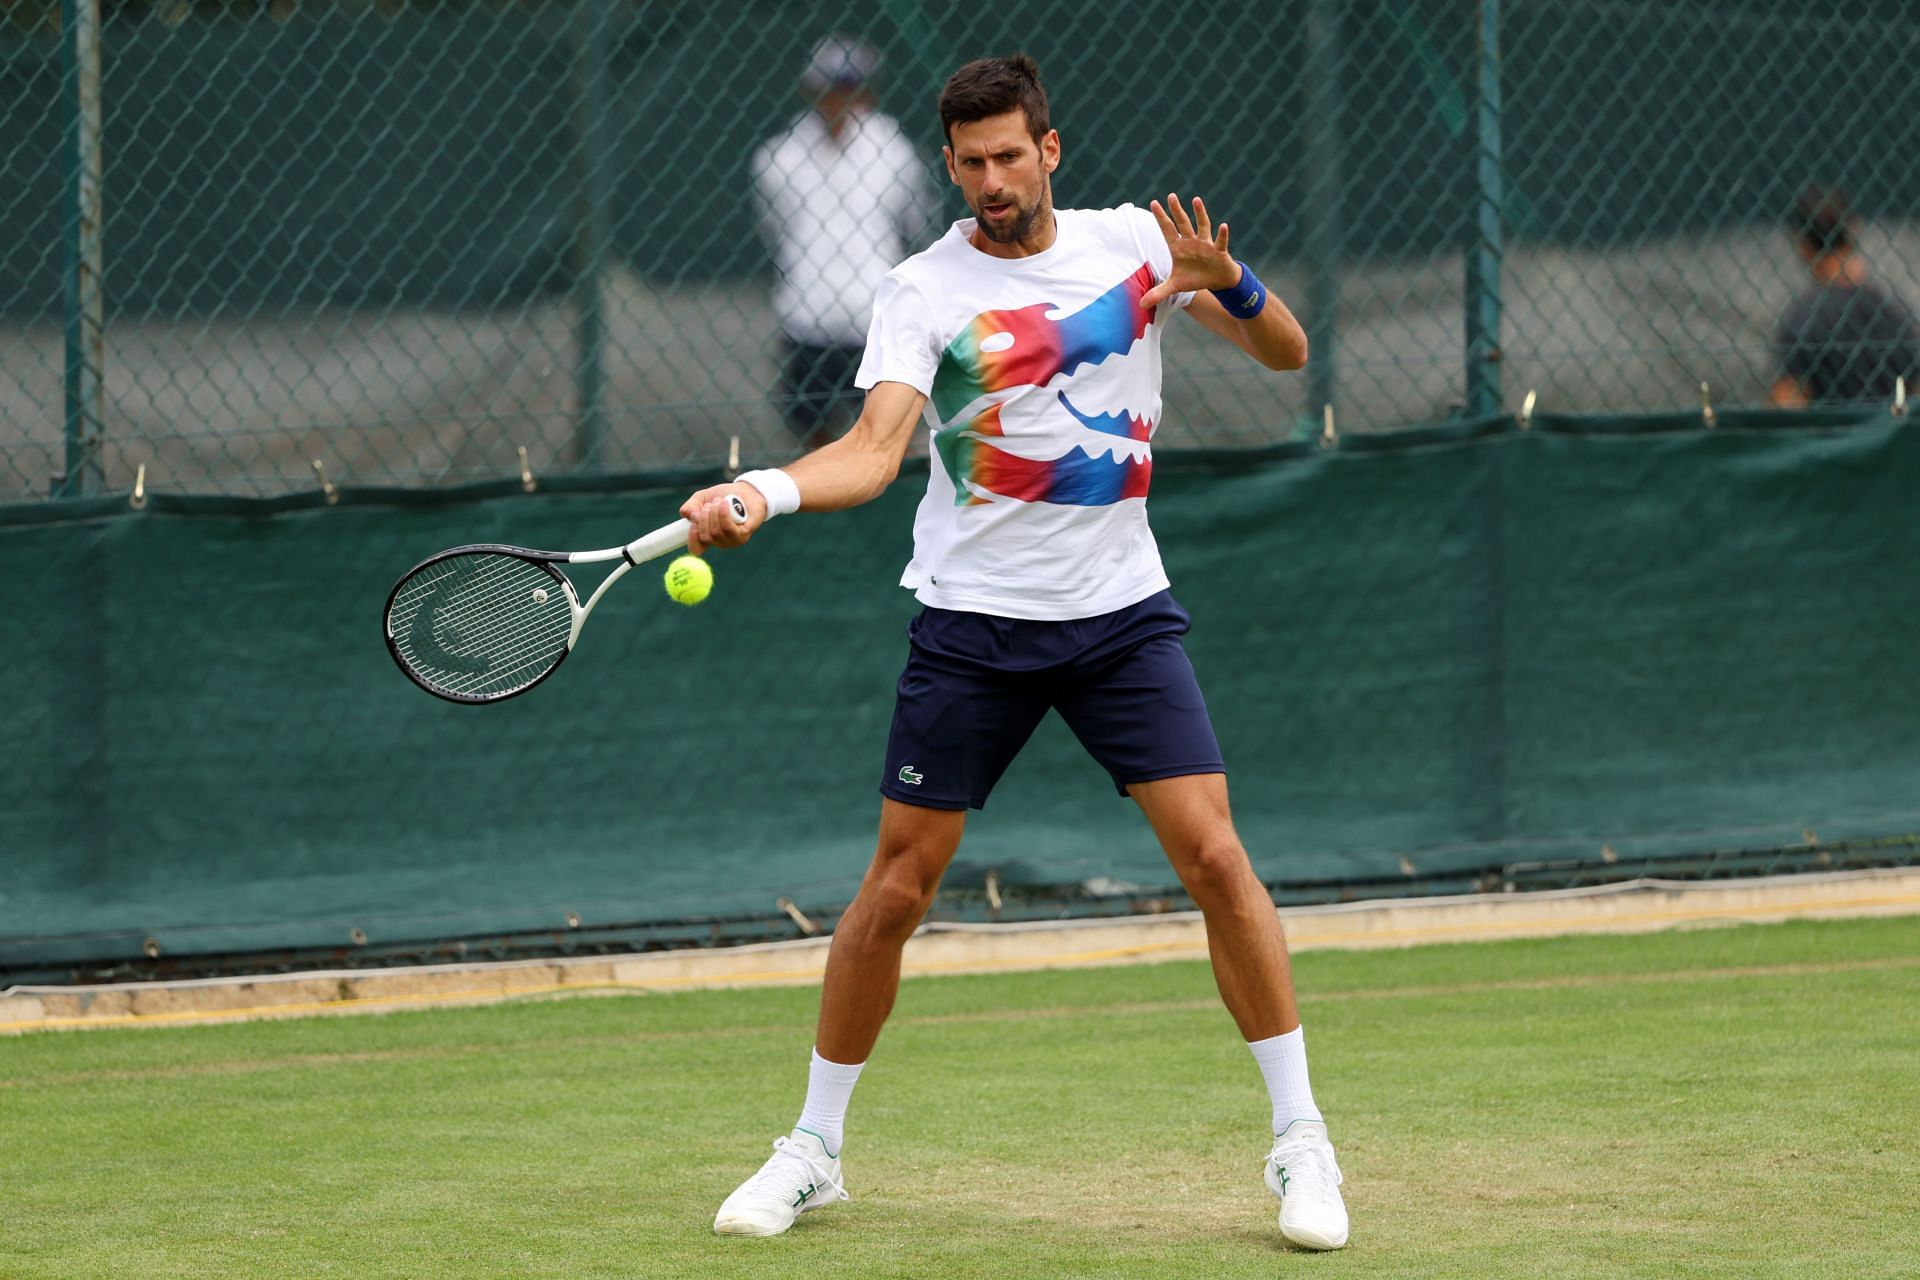 Novak Djokovic is the clear favorite for the 2022 Wimbledon Championships